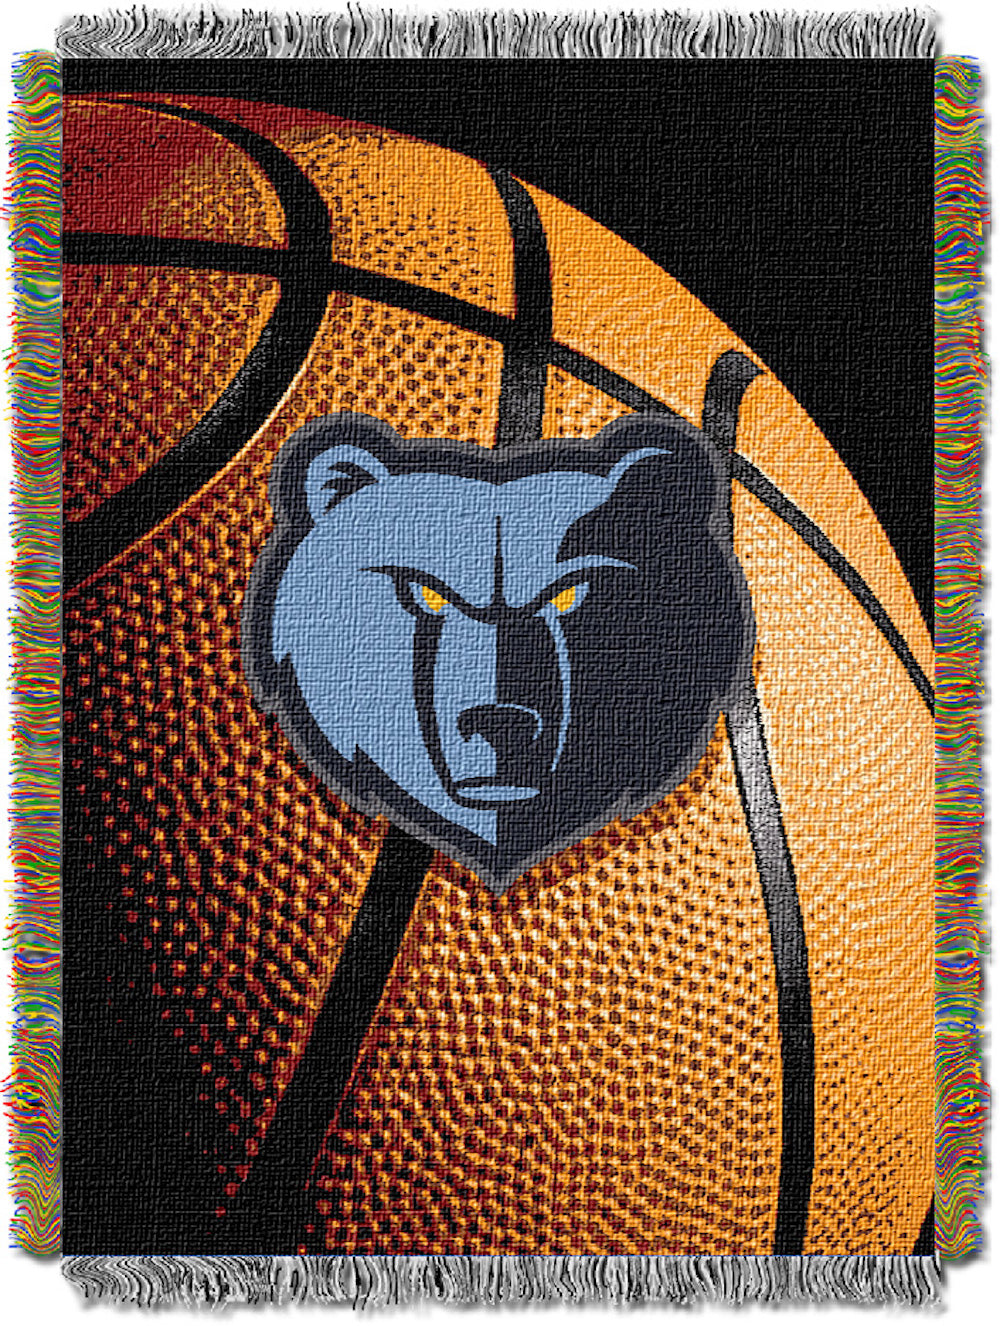 Memphis Grizzlies woven photo tapestry